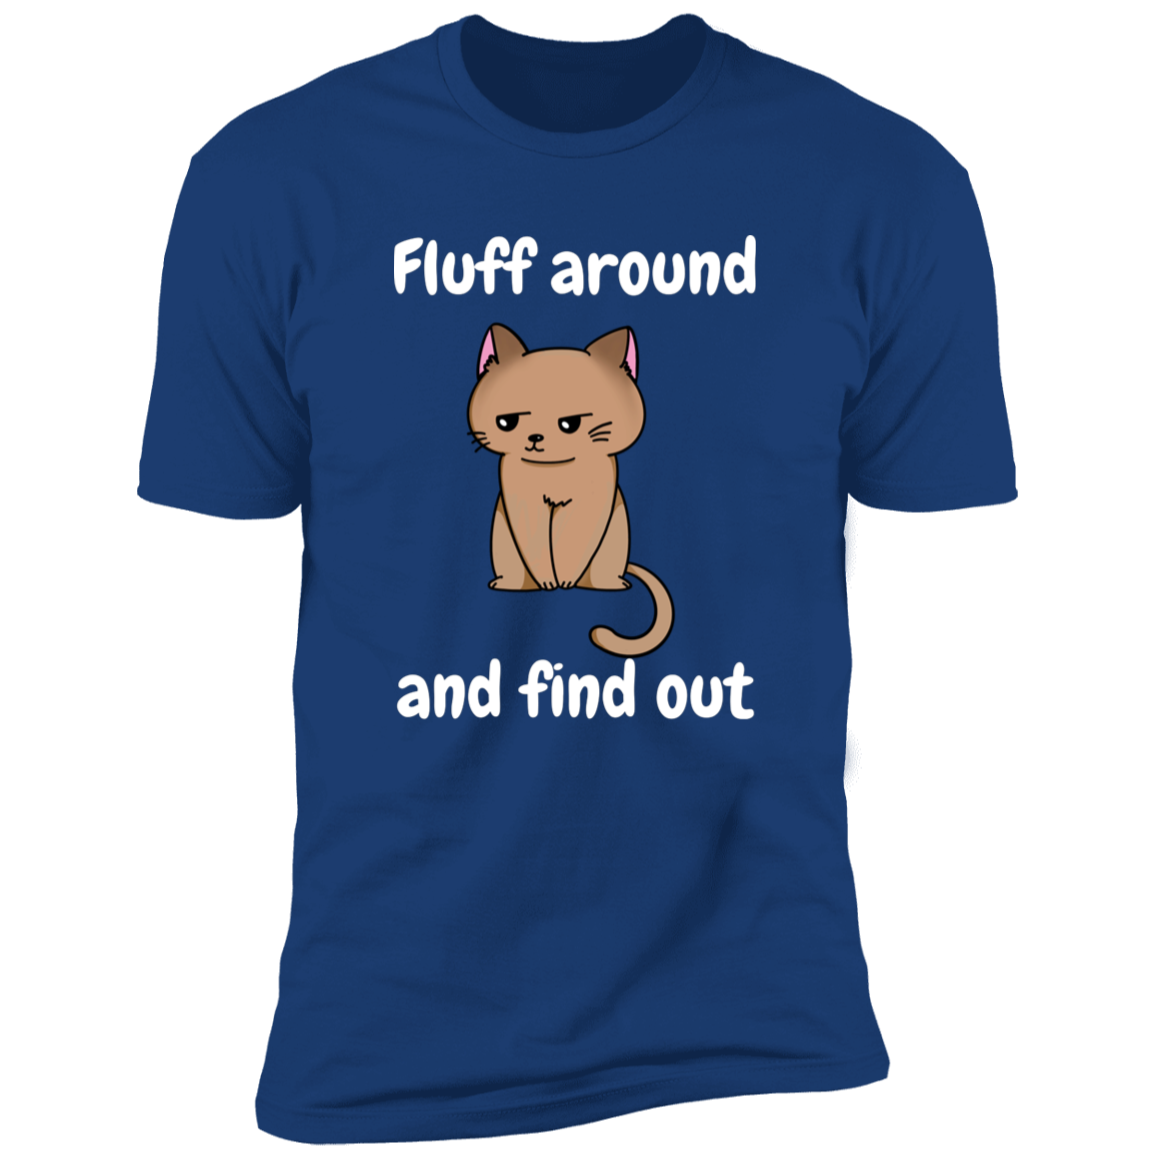 Fluff Around and Find Out Cat Shirt, funny cat shirt, funny cat shirt for humans, in royal blue